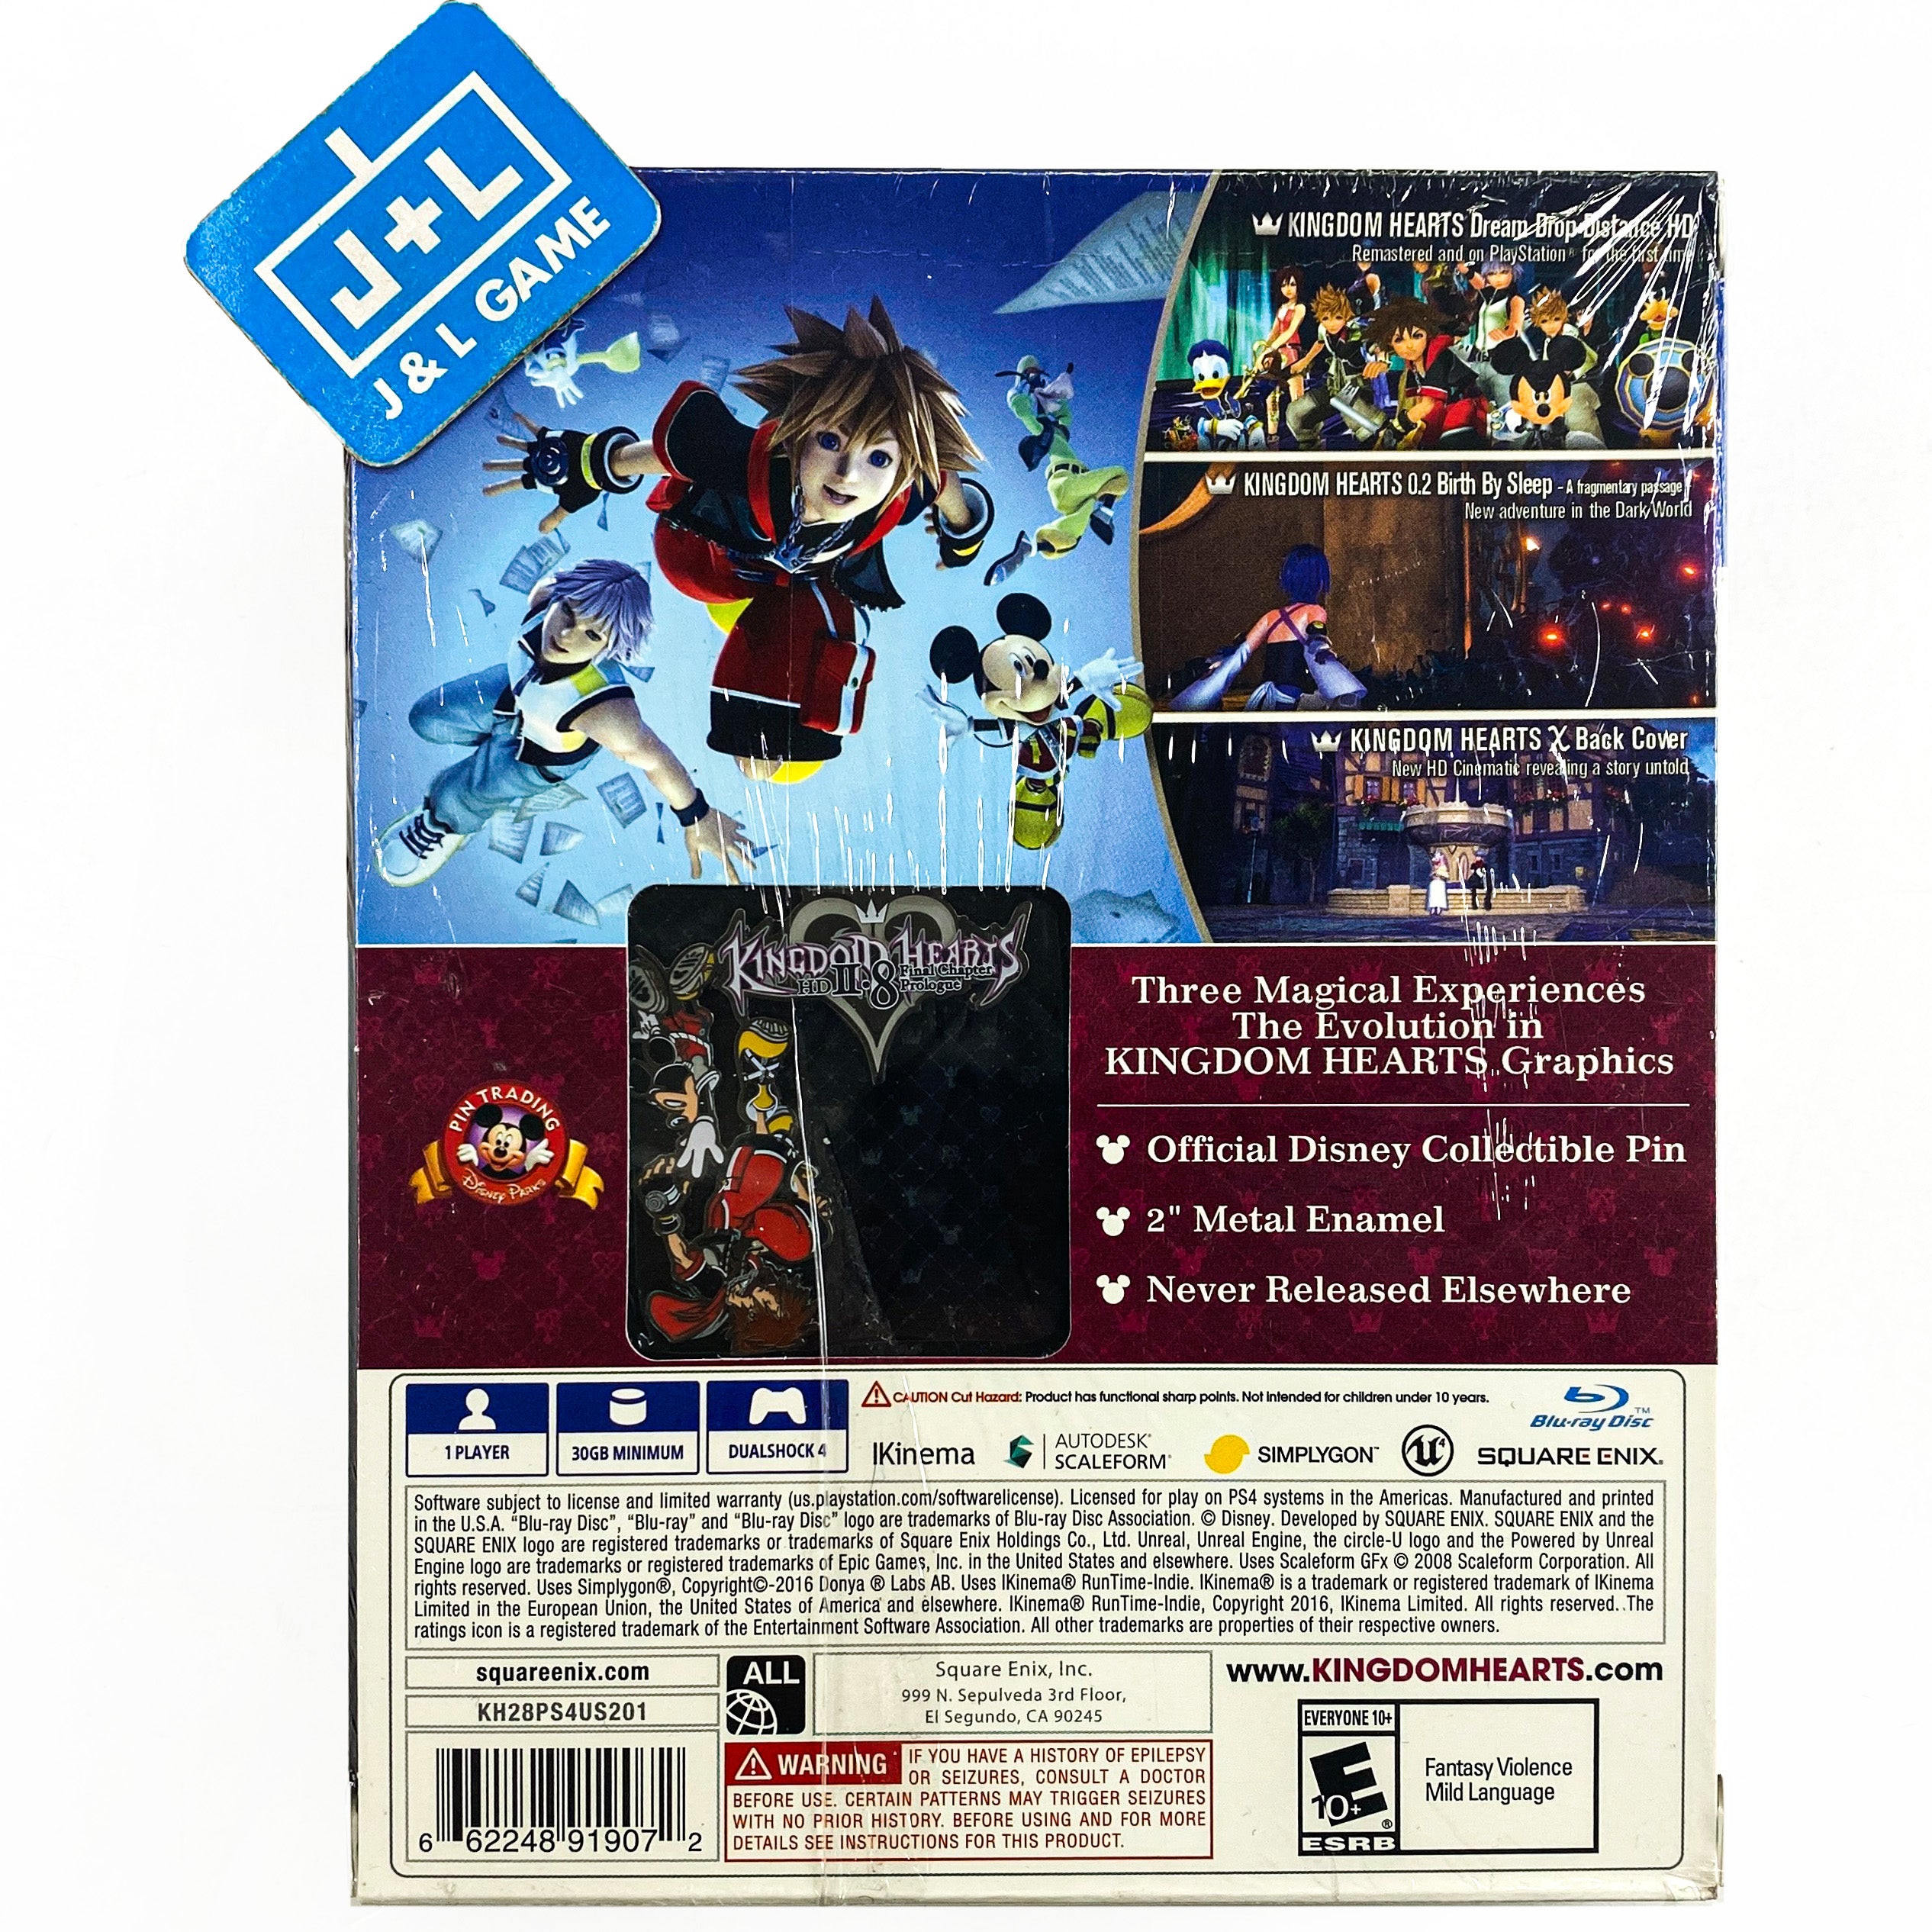 Kingdom Hearts HD 2.8 Final Chapter Prologue (Limited Edition) - (PS4) PlayStation 4 Video Games Square Enix   